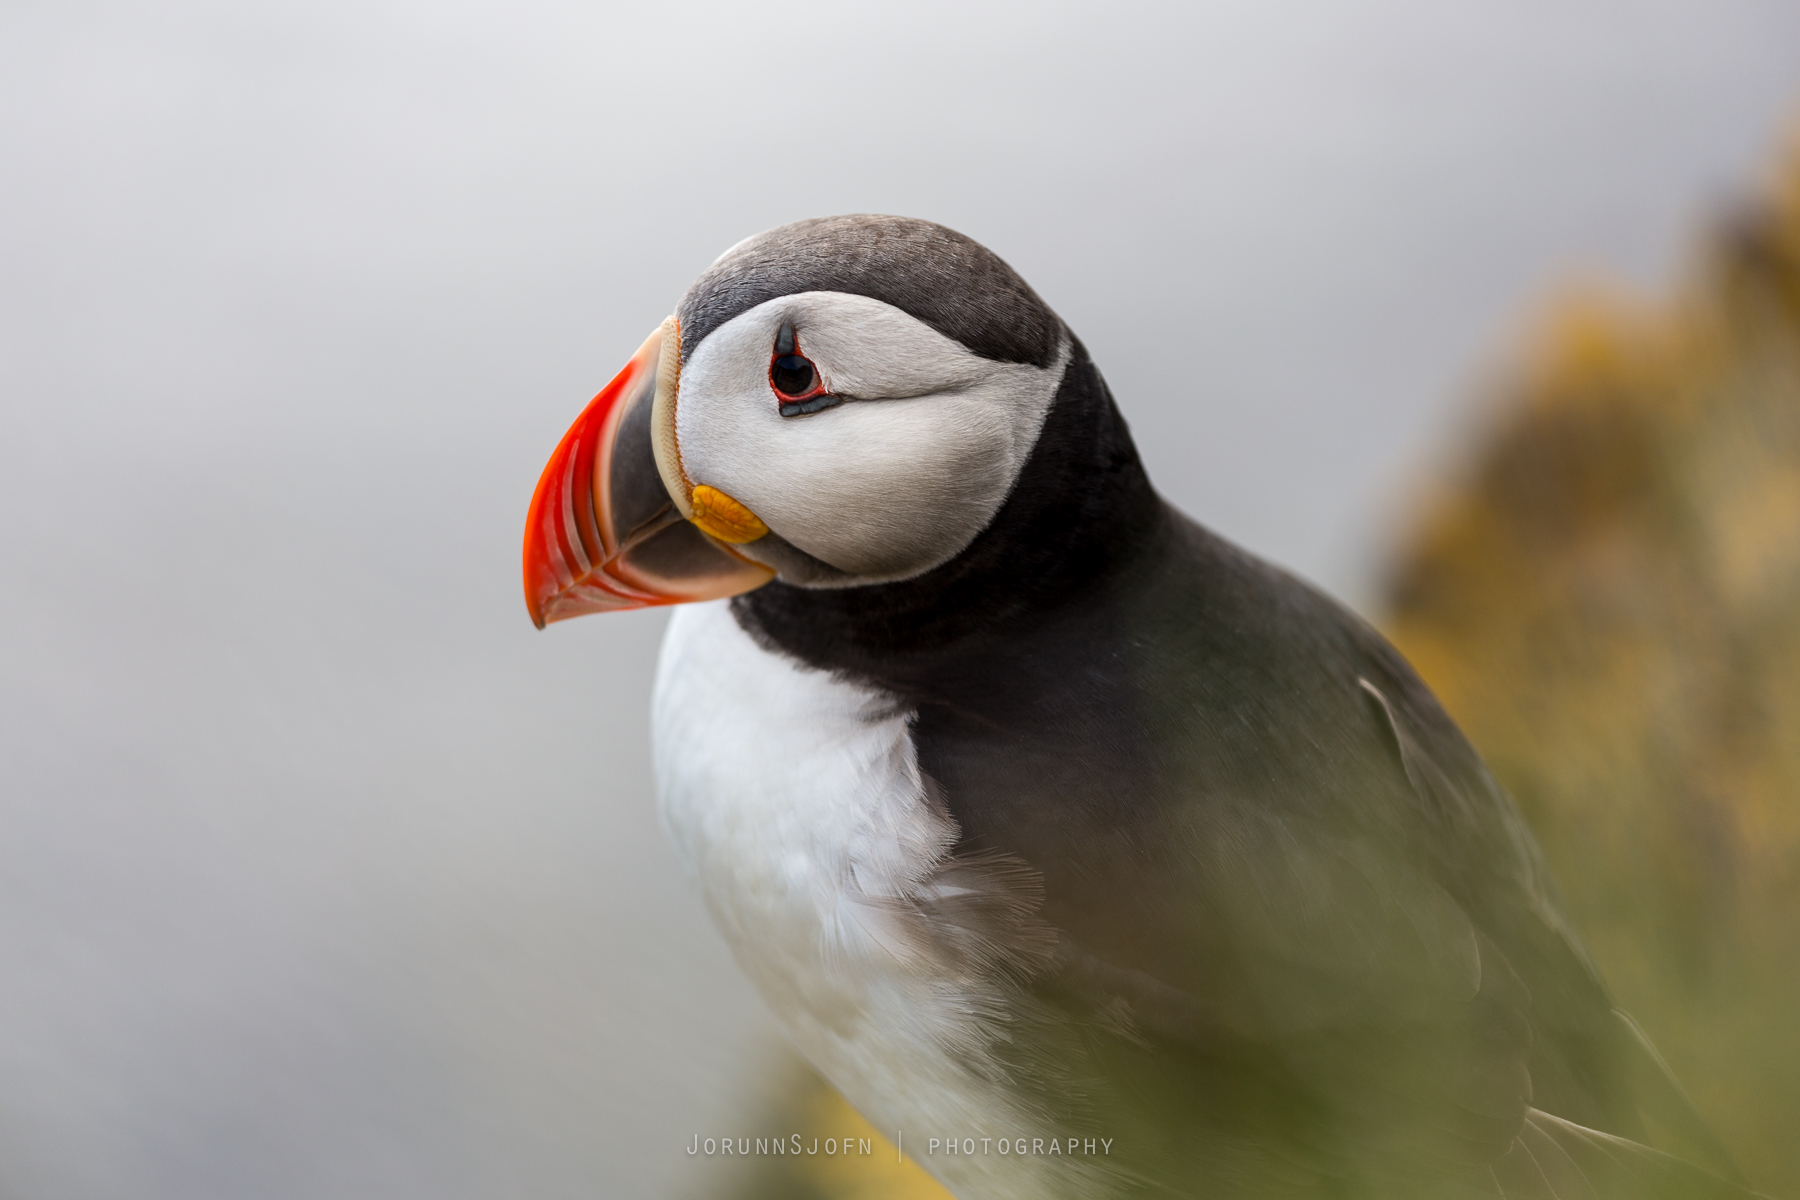 Puffins in Iceland - All You Need to Know About